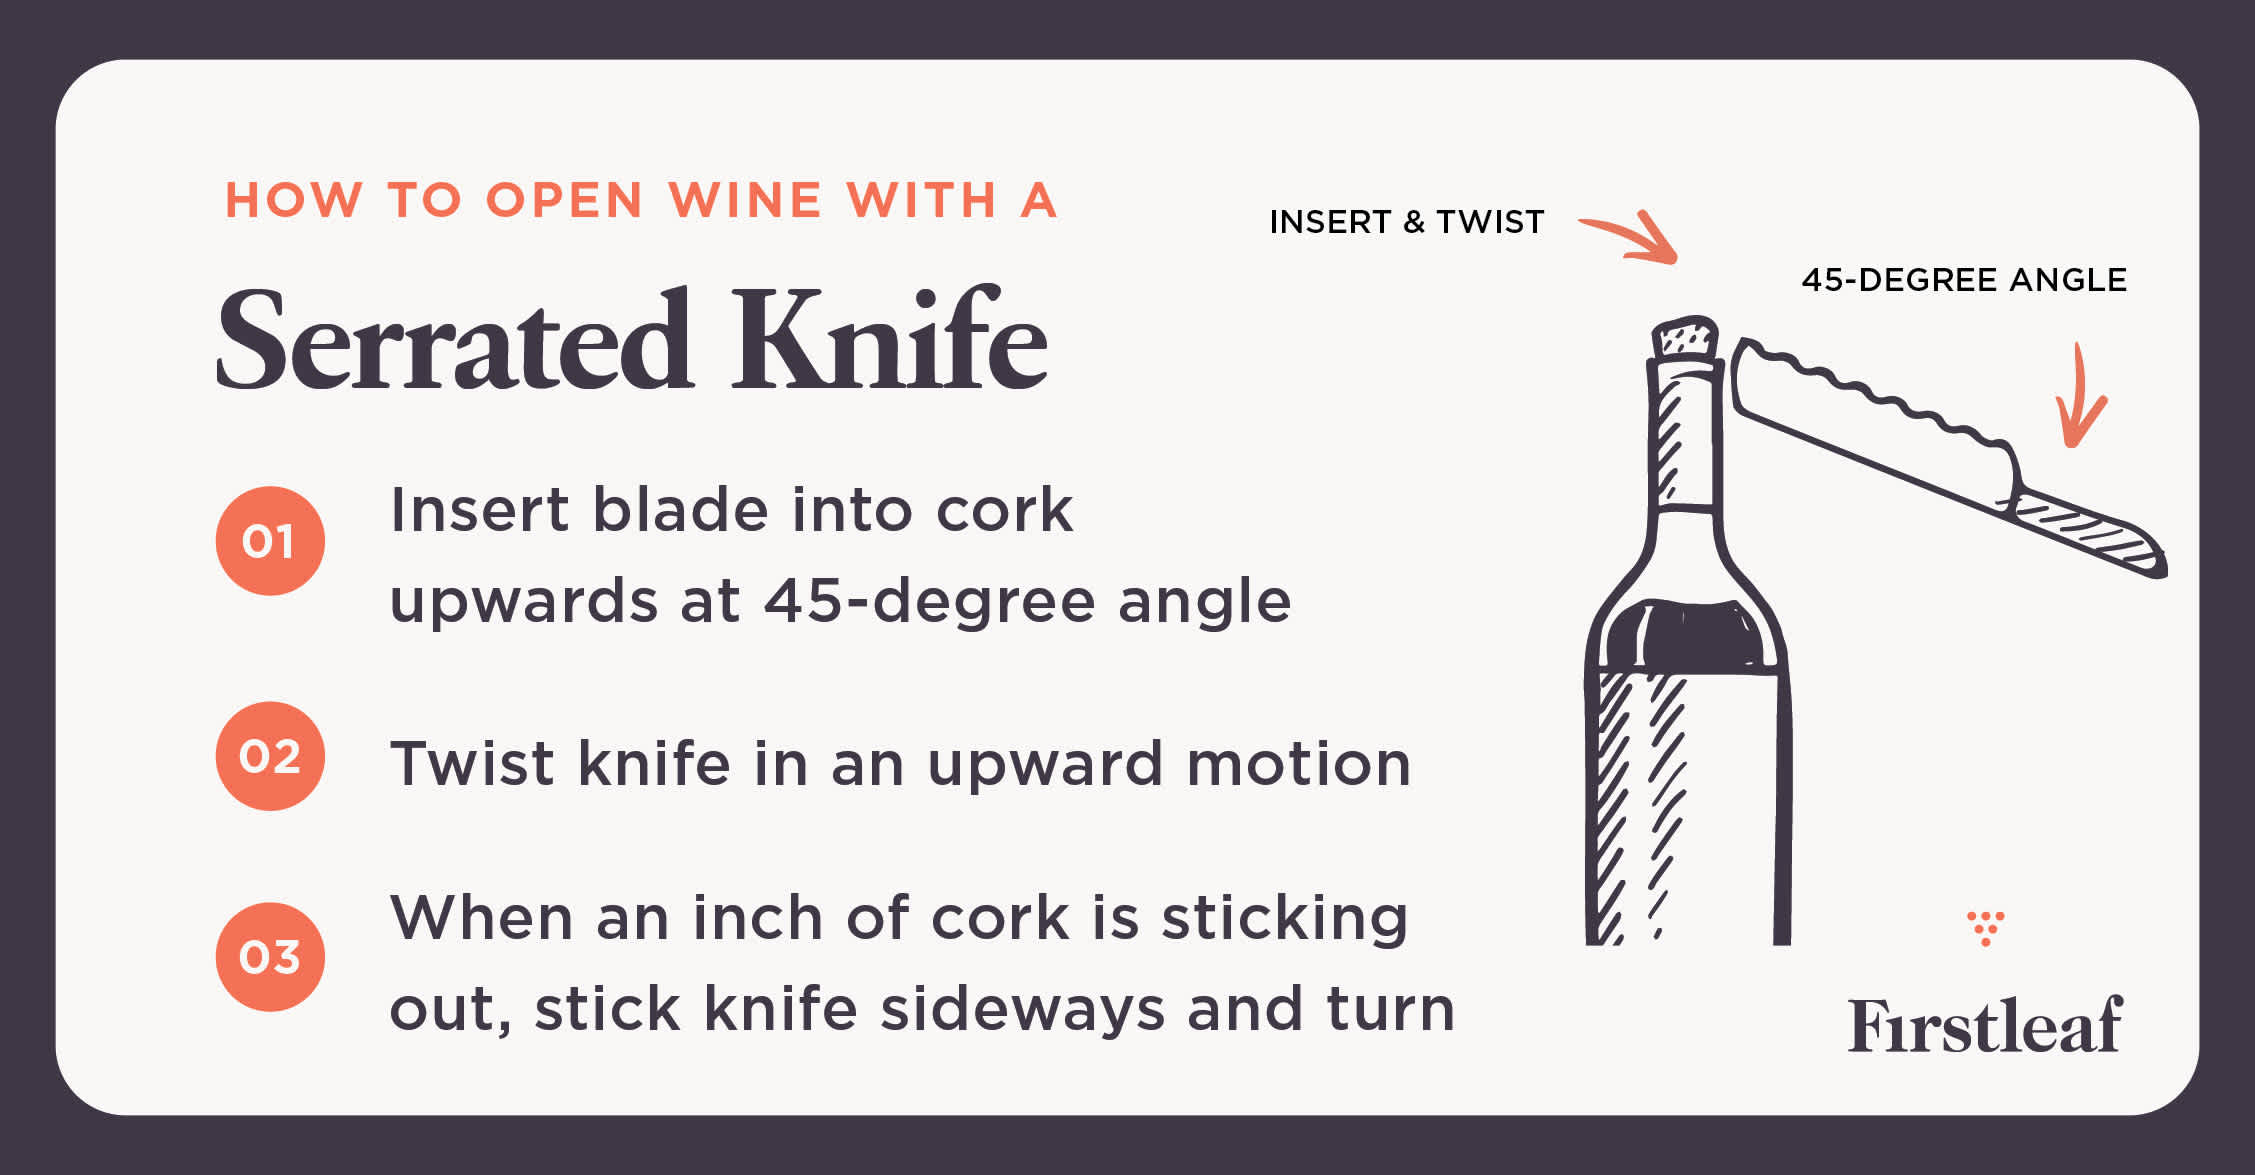 How to Open Wine with Serrated Knife